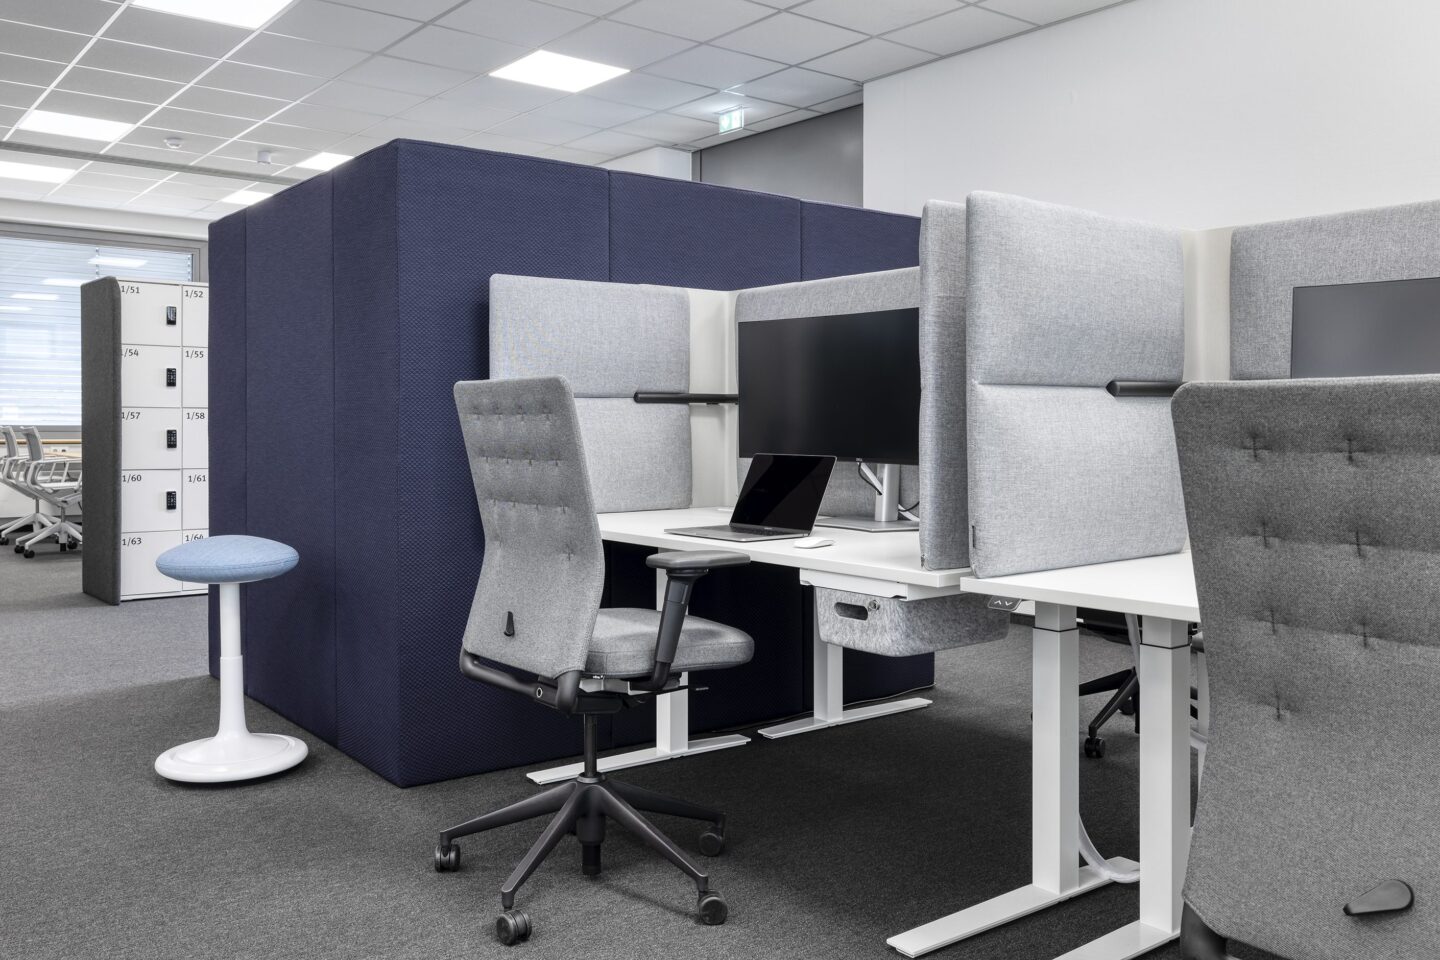 Seeburger Bretten │ office furniture by Brunner, Lapalma, Vitra & more │ agile project work